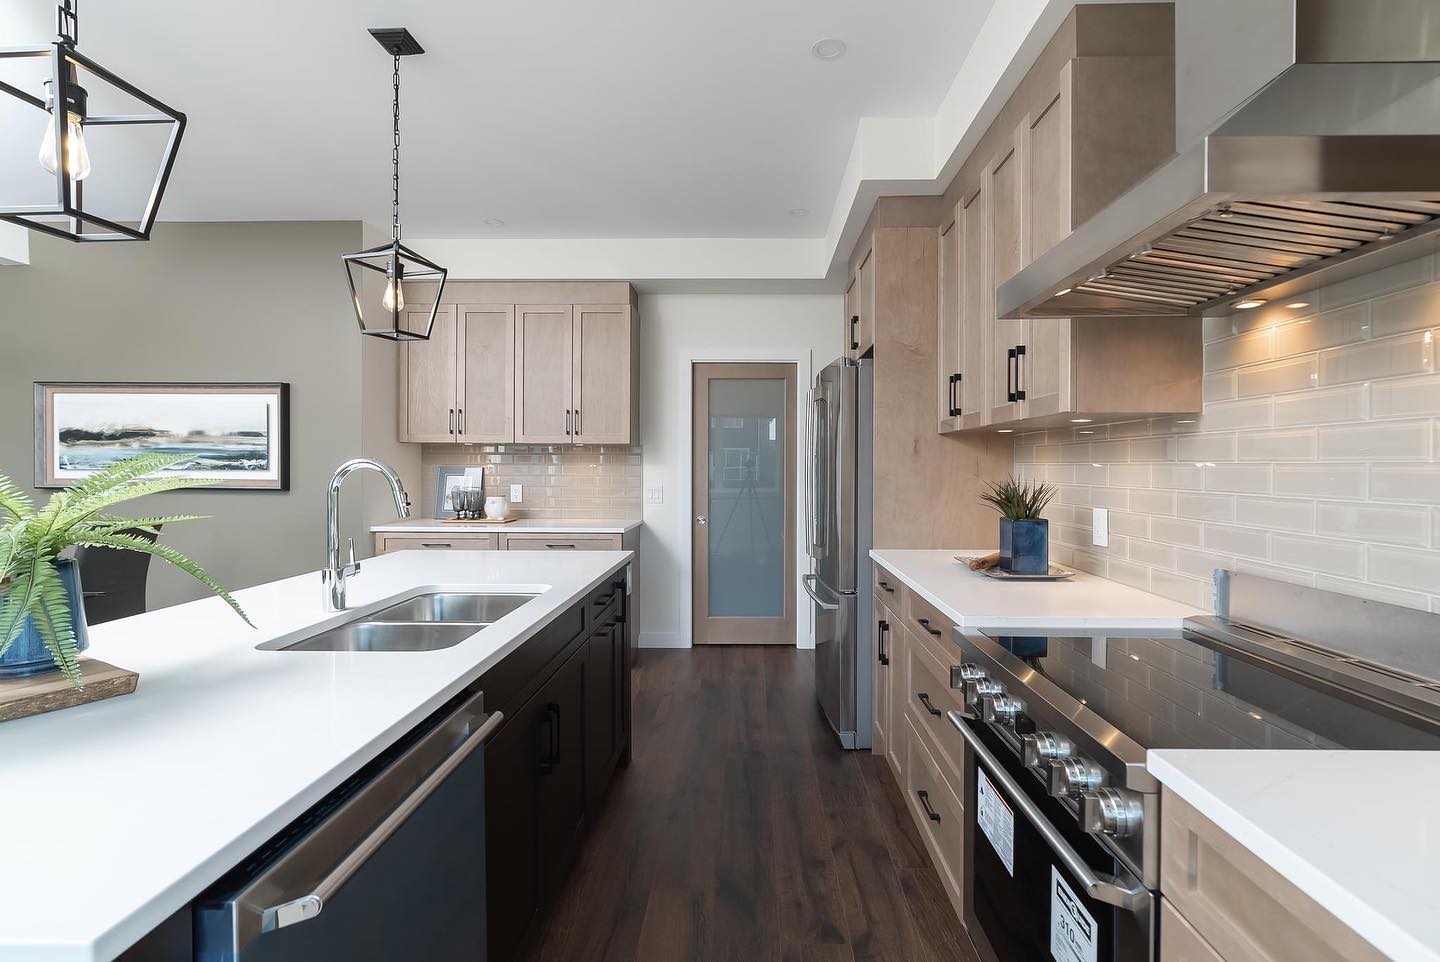 Kitchen views at 103 Valley Brook Road! The selections in this home create the perfect contrast.

Available for immediate possession - learn more through the link in our bio.